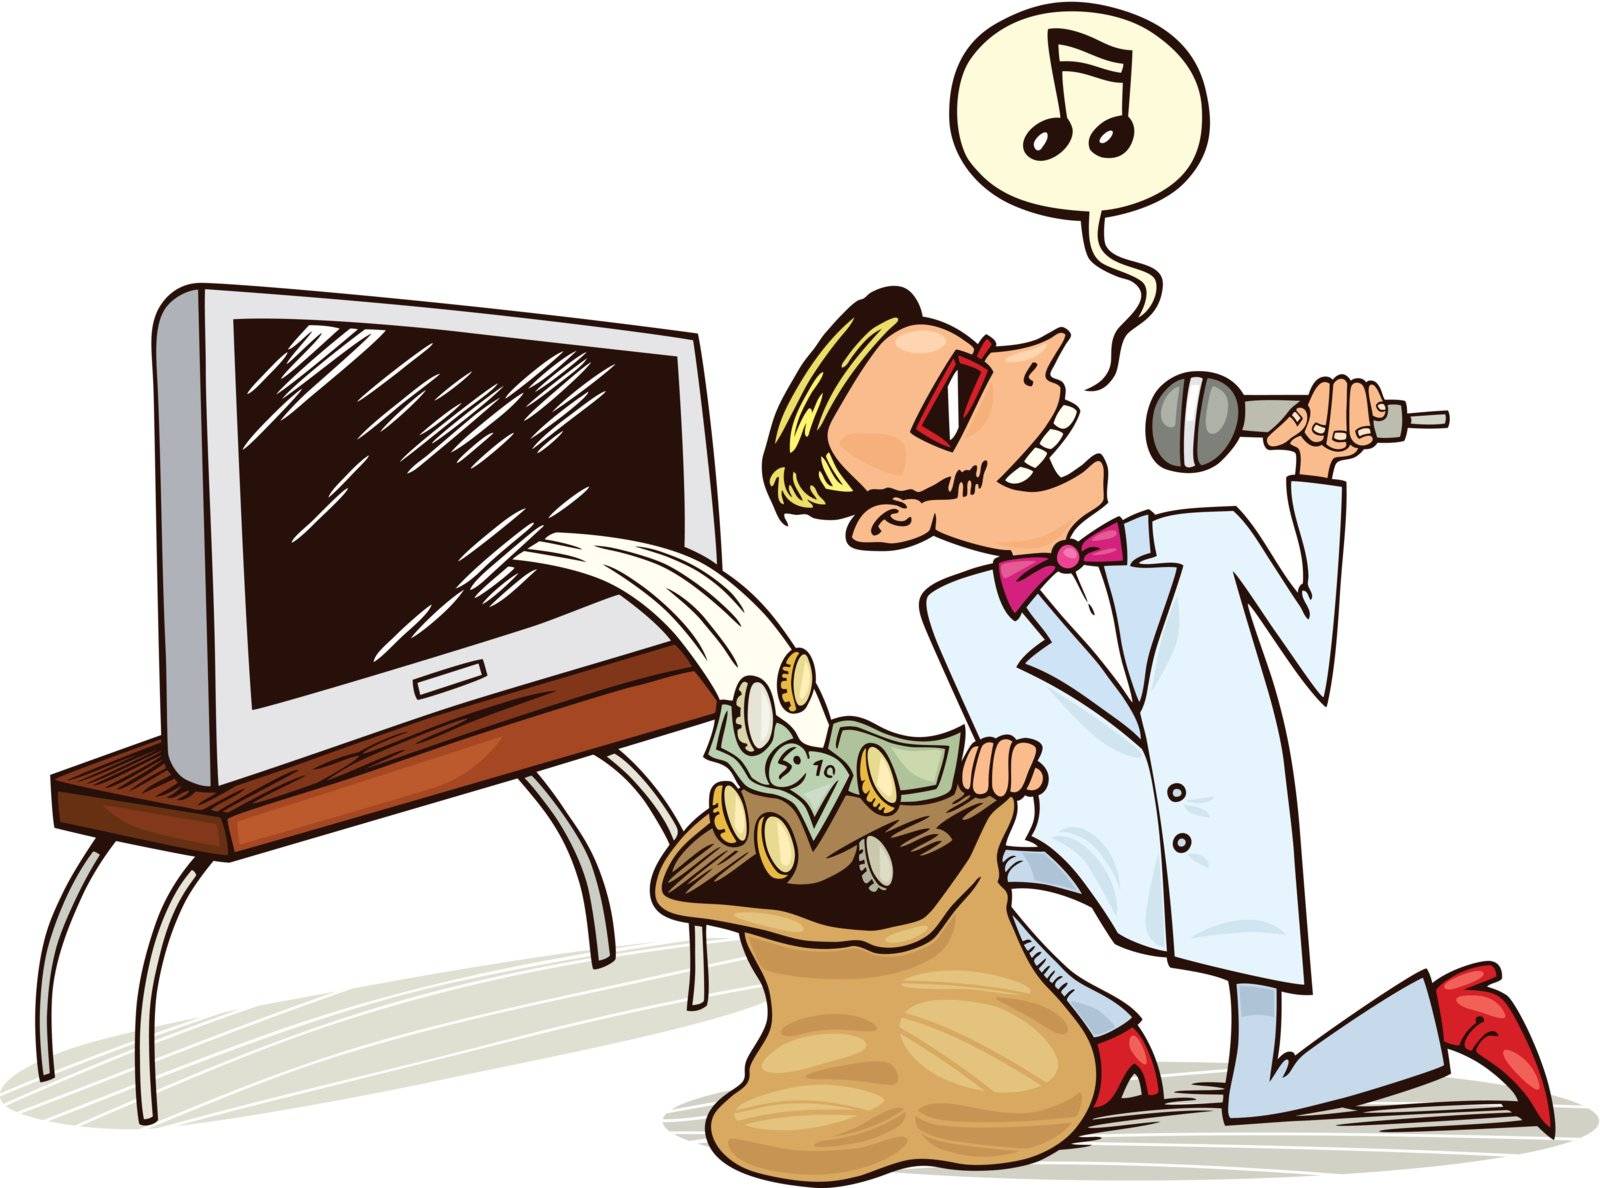 Illustration of singing Man who receive profit from copyrights